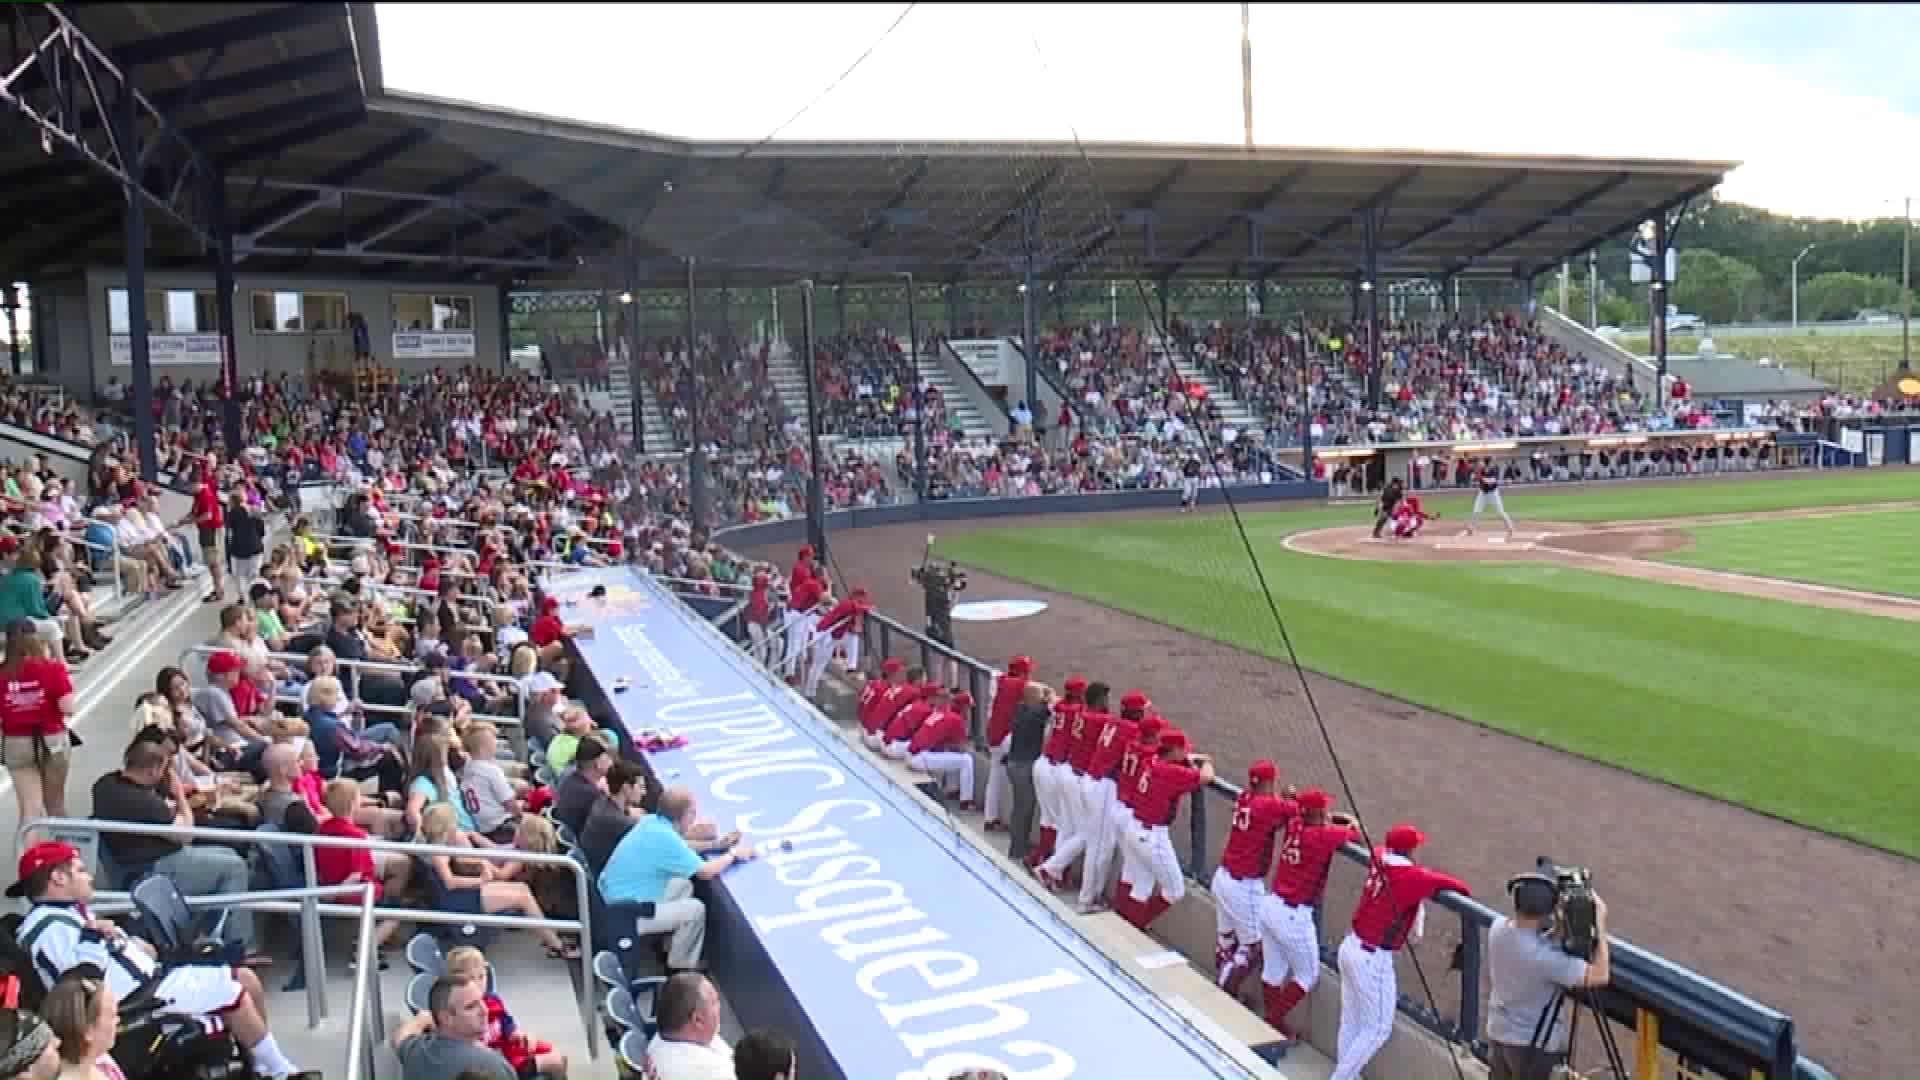 In Williamsport, Fans Check out Face-lift at Historic Bowman Field